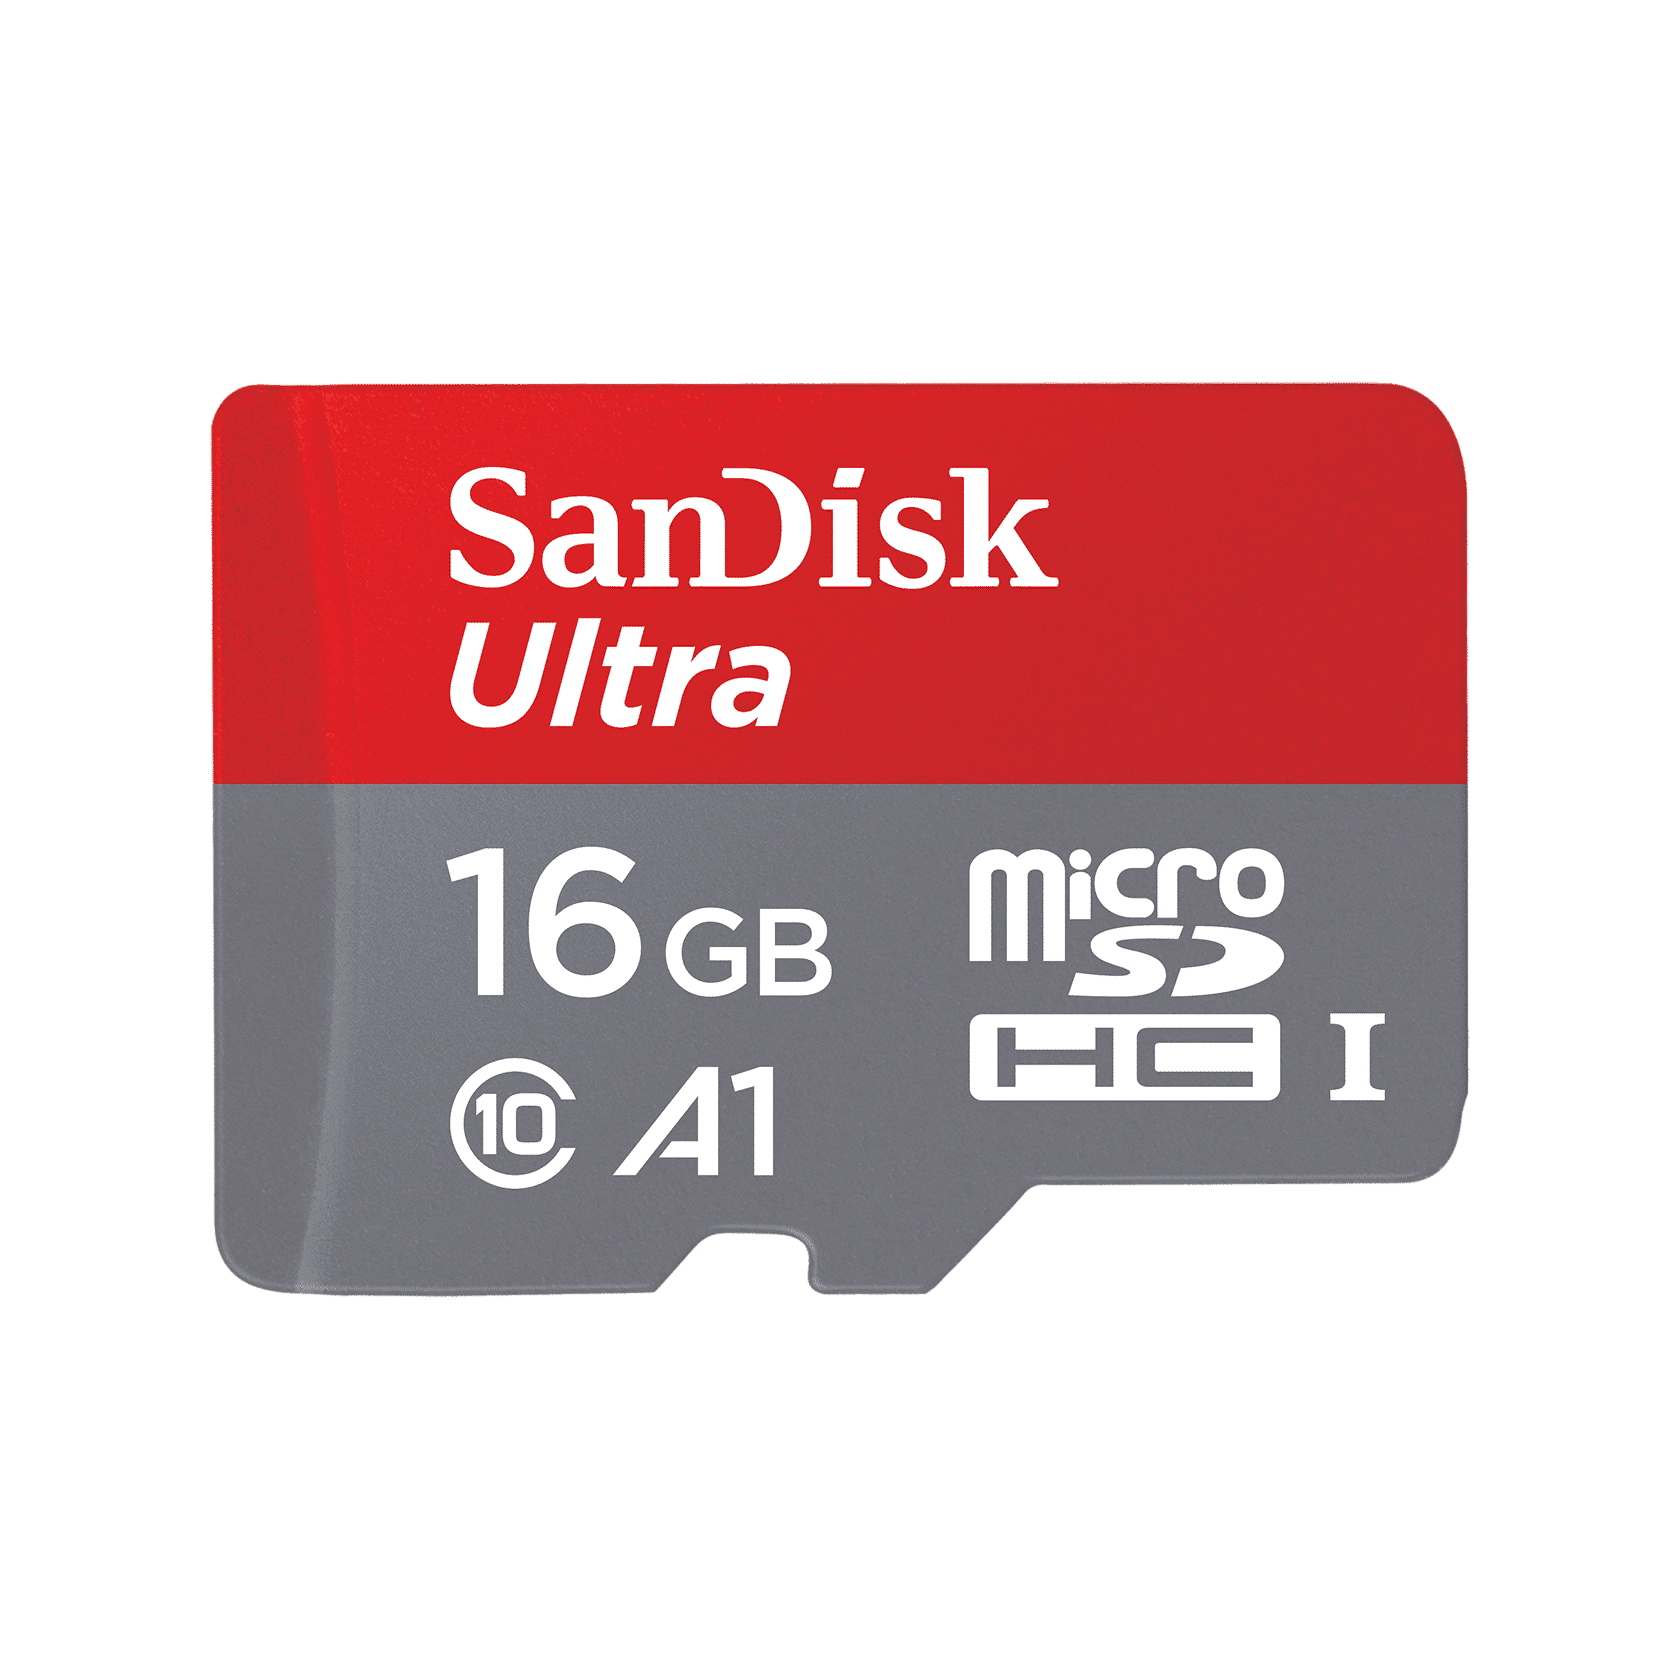 SANDISK-MICRO-SDHC-16GB.png